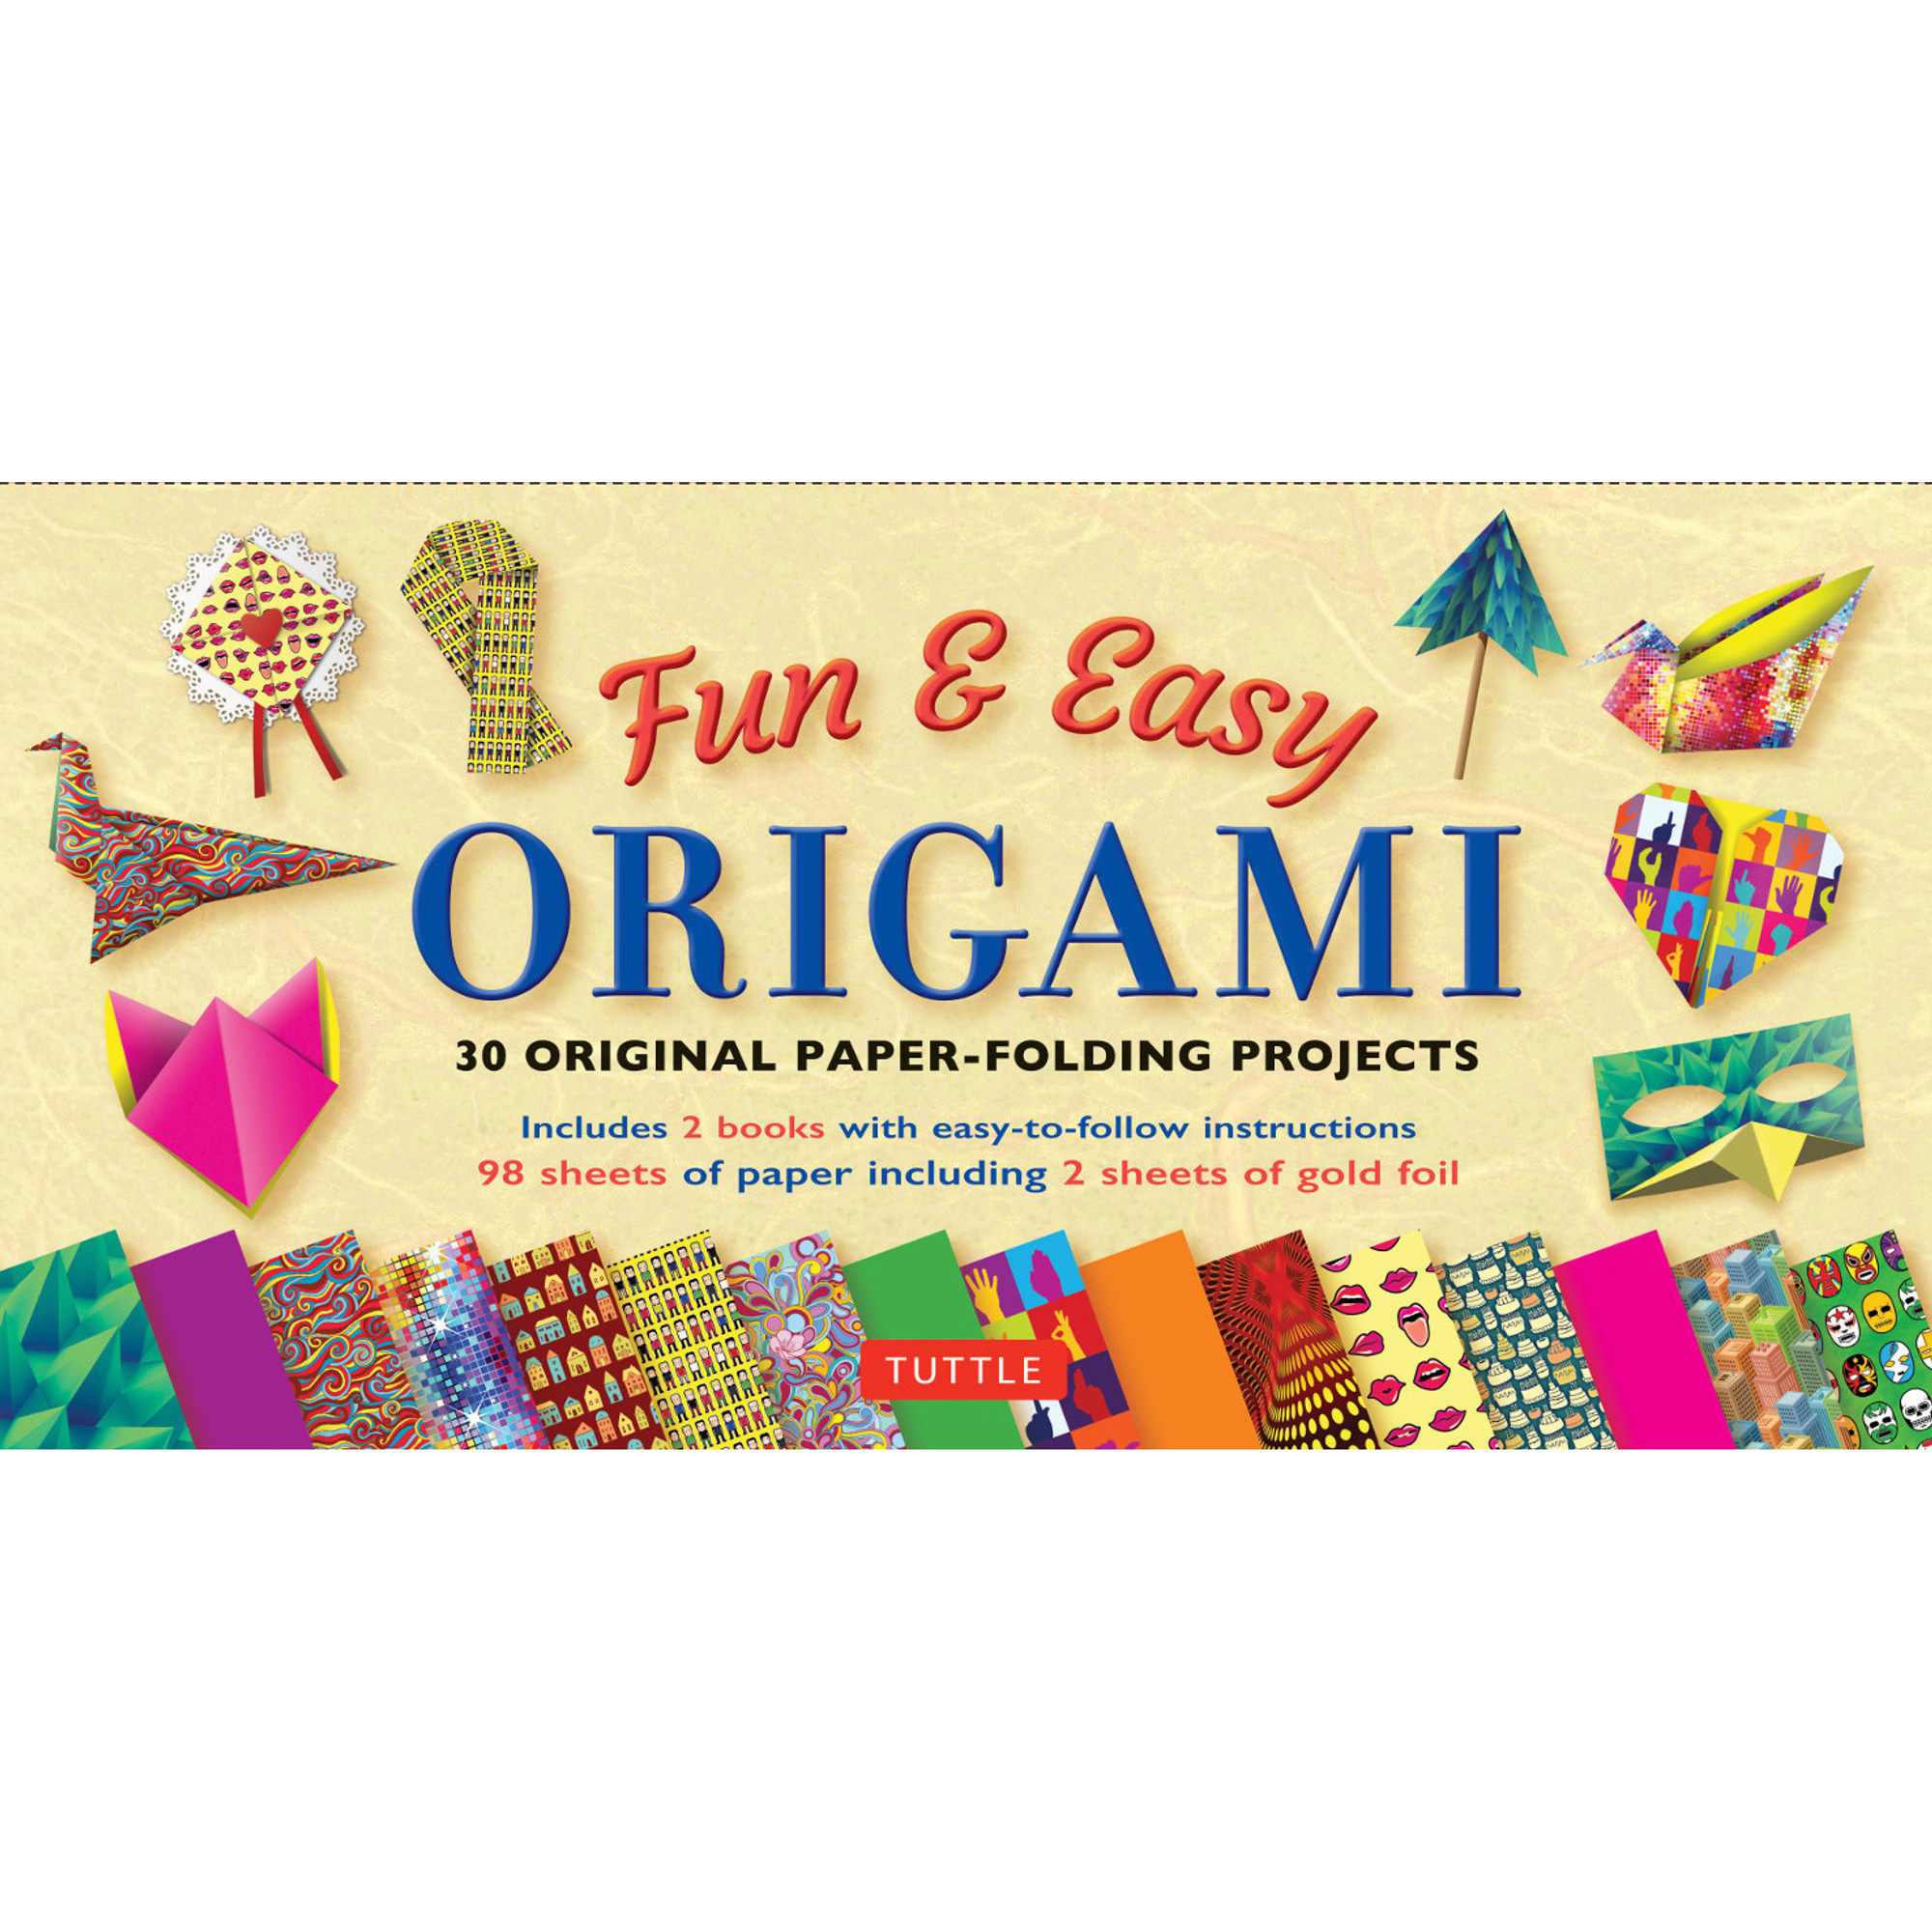 2000s B&N Origami Kit Paper Craft Beginner Makes 40 Projects. Has All 30  Sheets